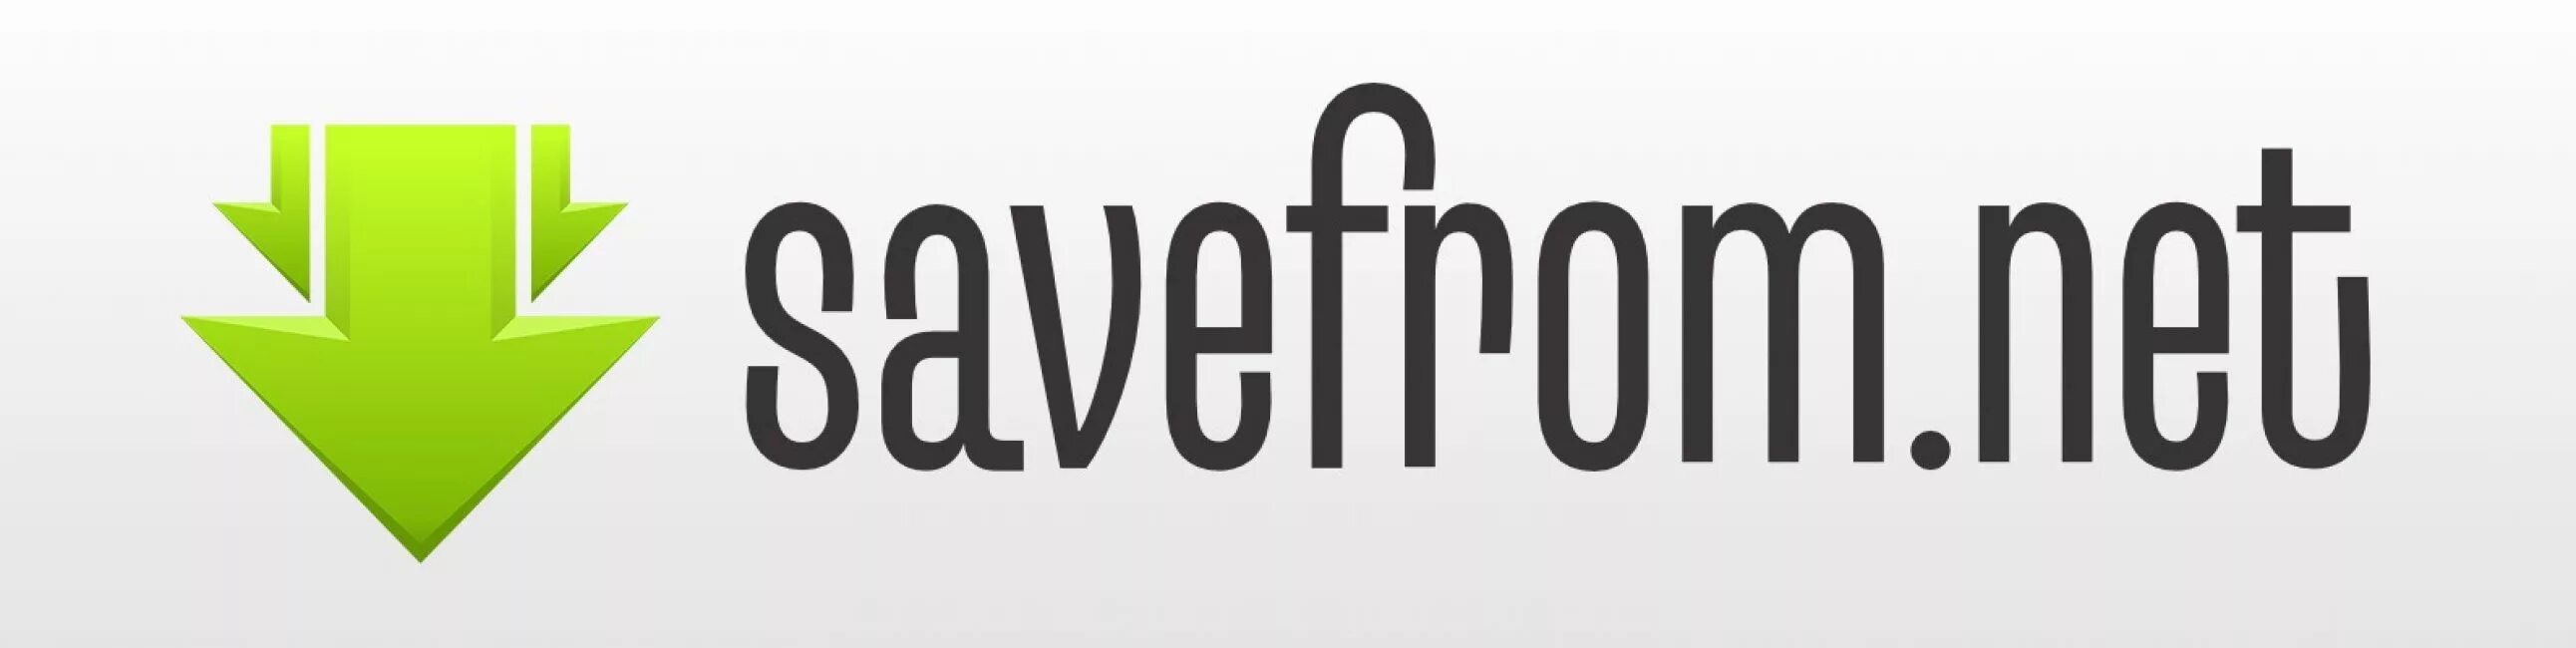 Extensions details savefromnet helper. Savefrom. Savefrom.net иконка. Savefrom логотип. Safe from.